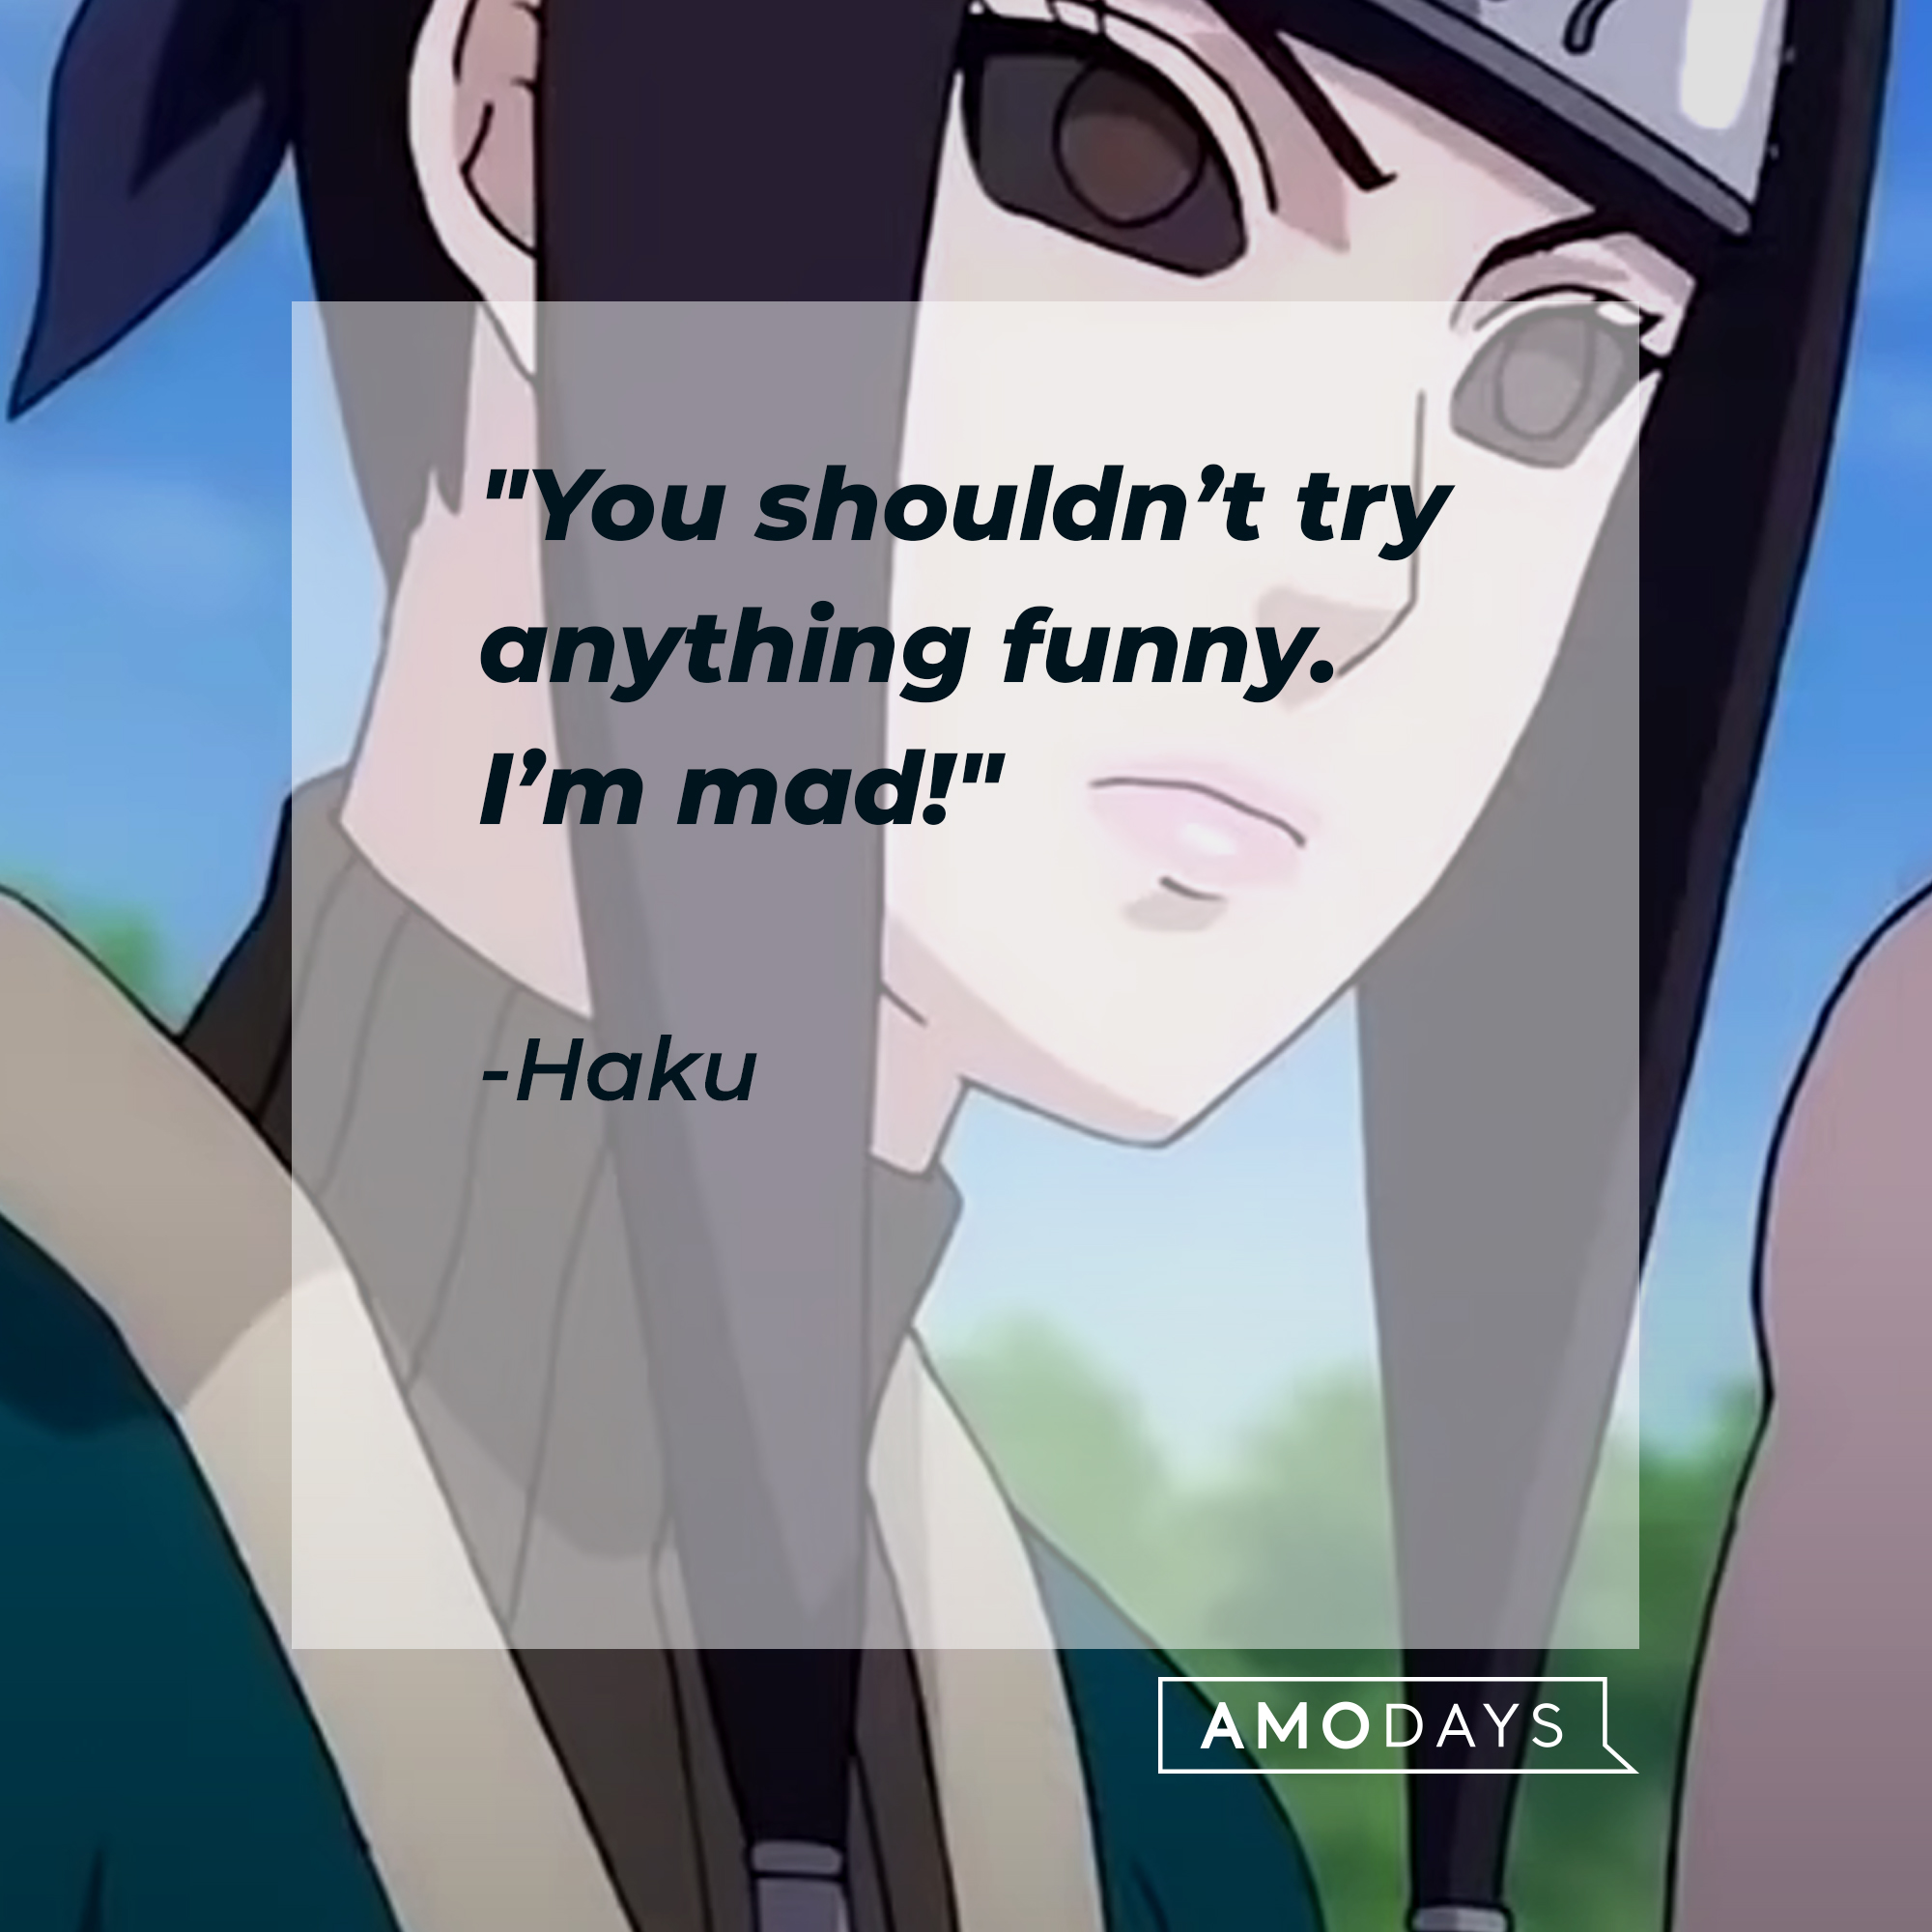 Haku, with his quote: "You shouldn’t try anything funny. I’m mad!” | Source: facebook.com/narutoofficialsns